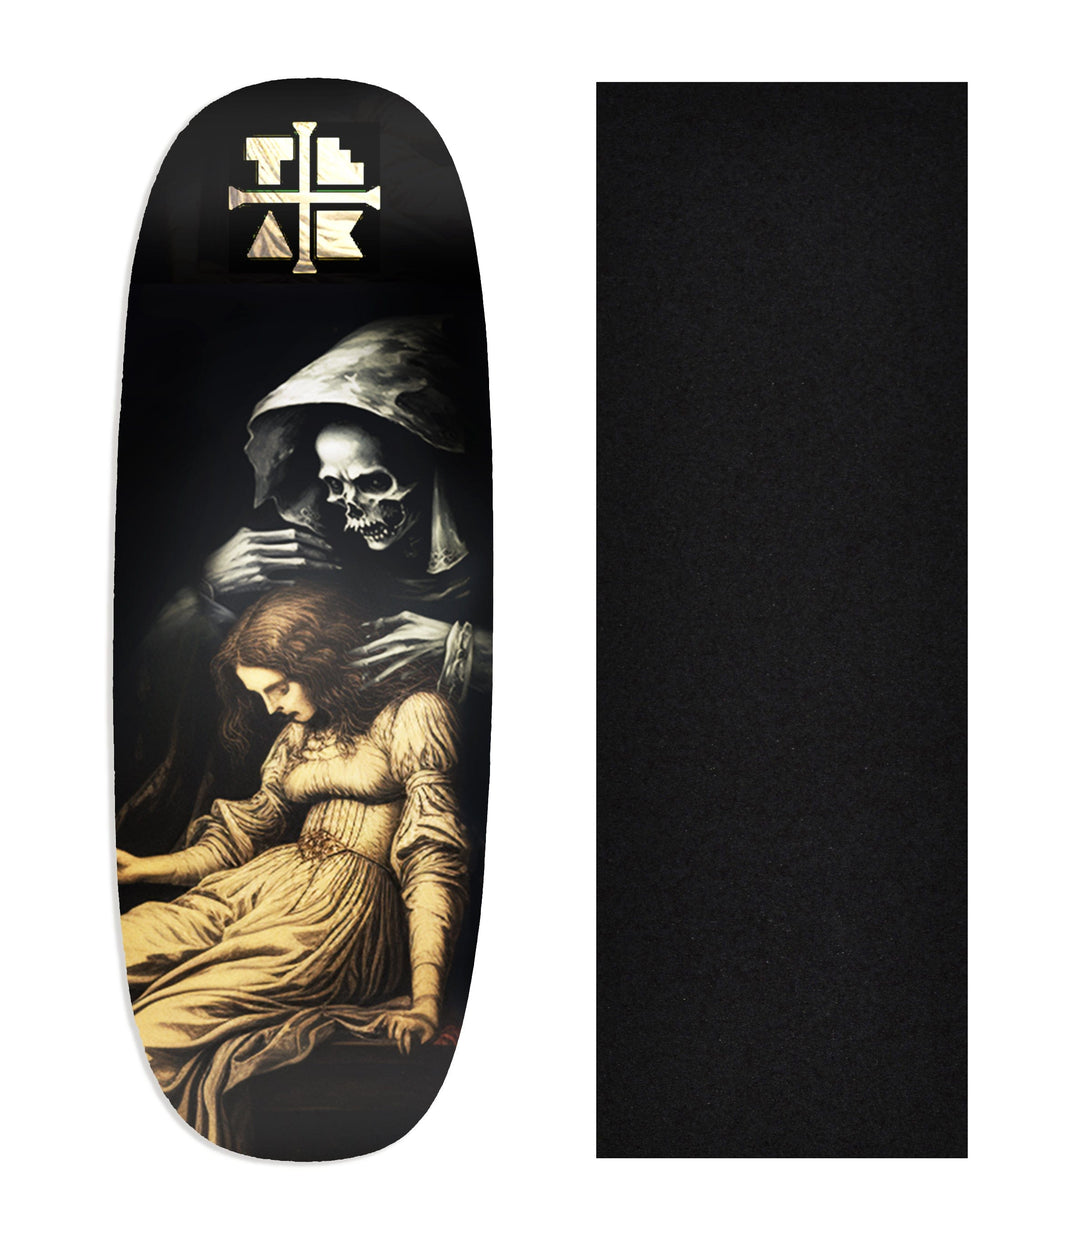 Teak Tuning Heat Transfer Graphic Wooden Fingerboard Deck, "The Visit" Ohhh Deck